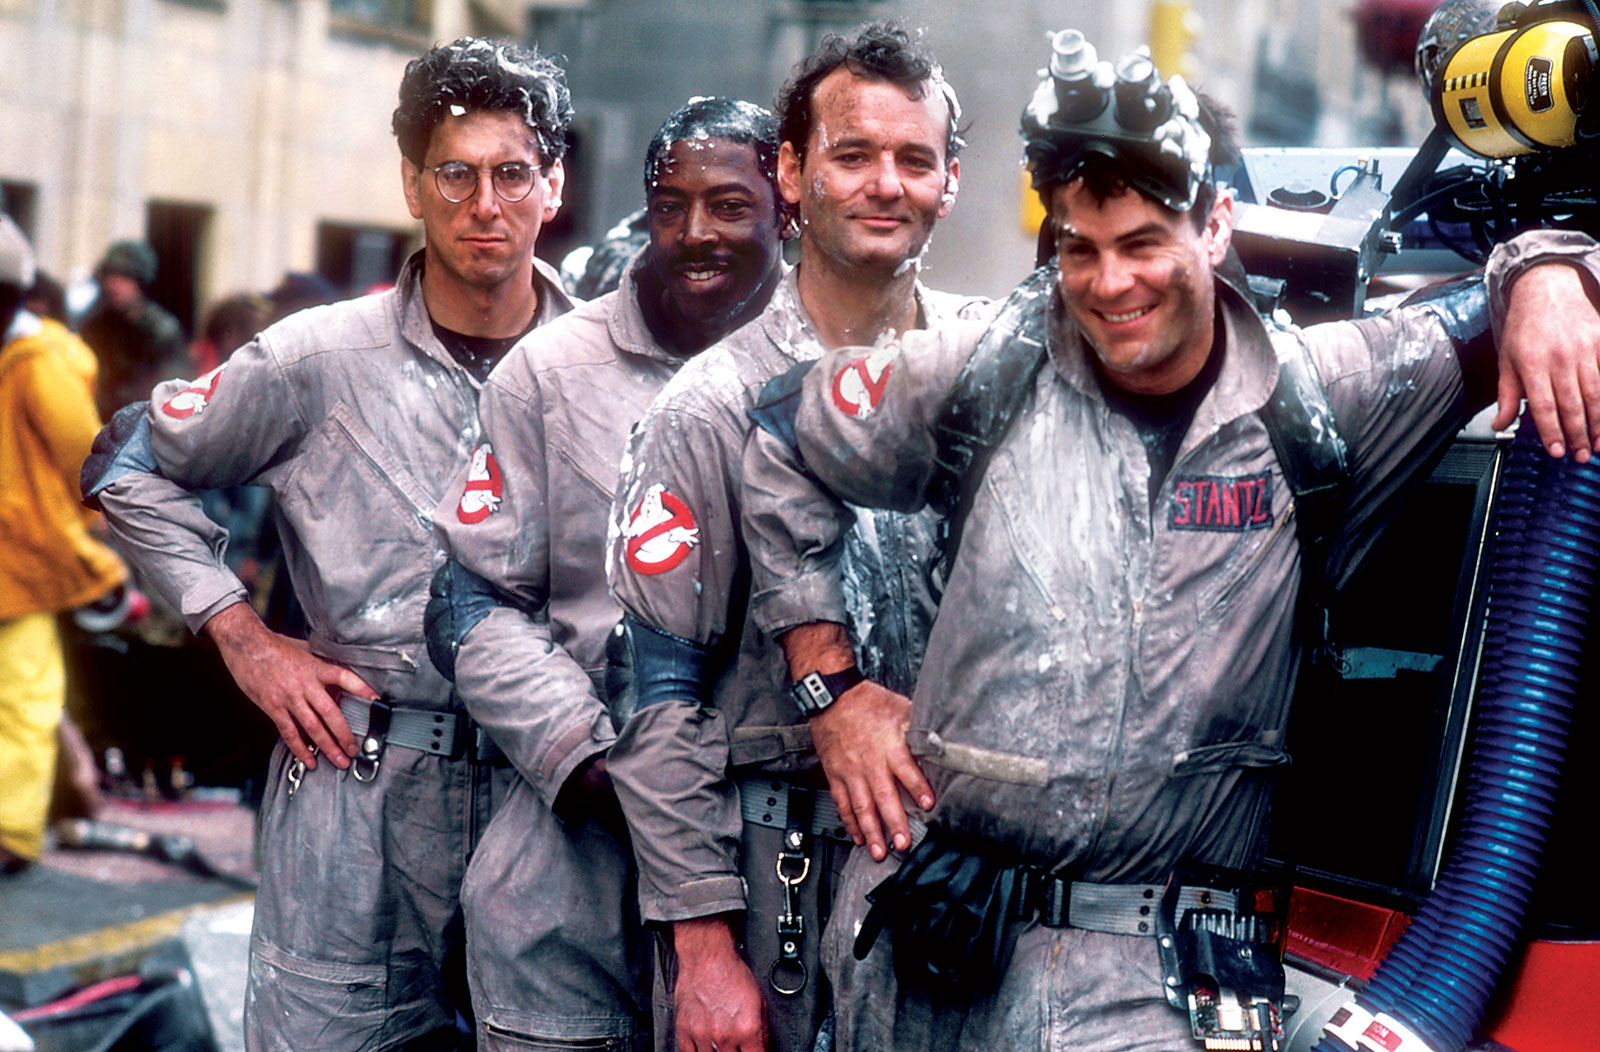 Can You Go 15/15 on This Incredibly Easy Movie Quiz? Ghostbusters